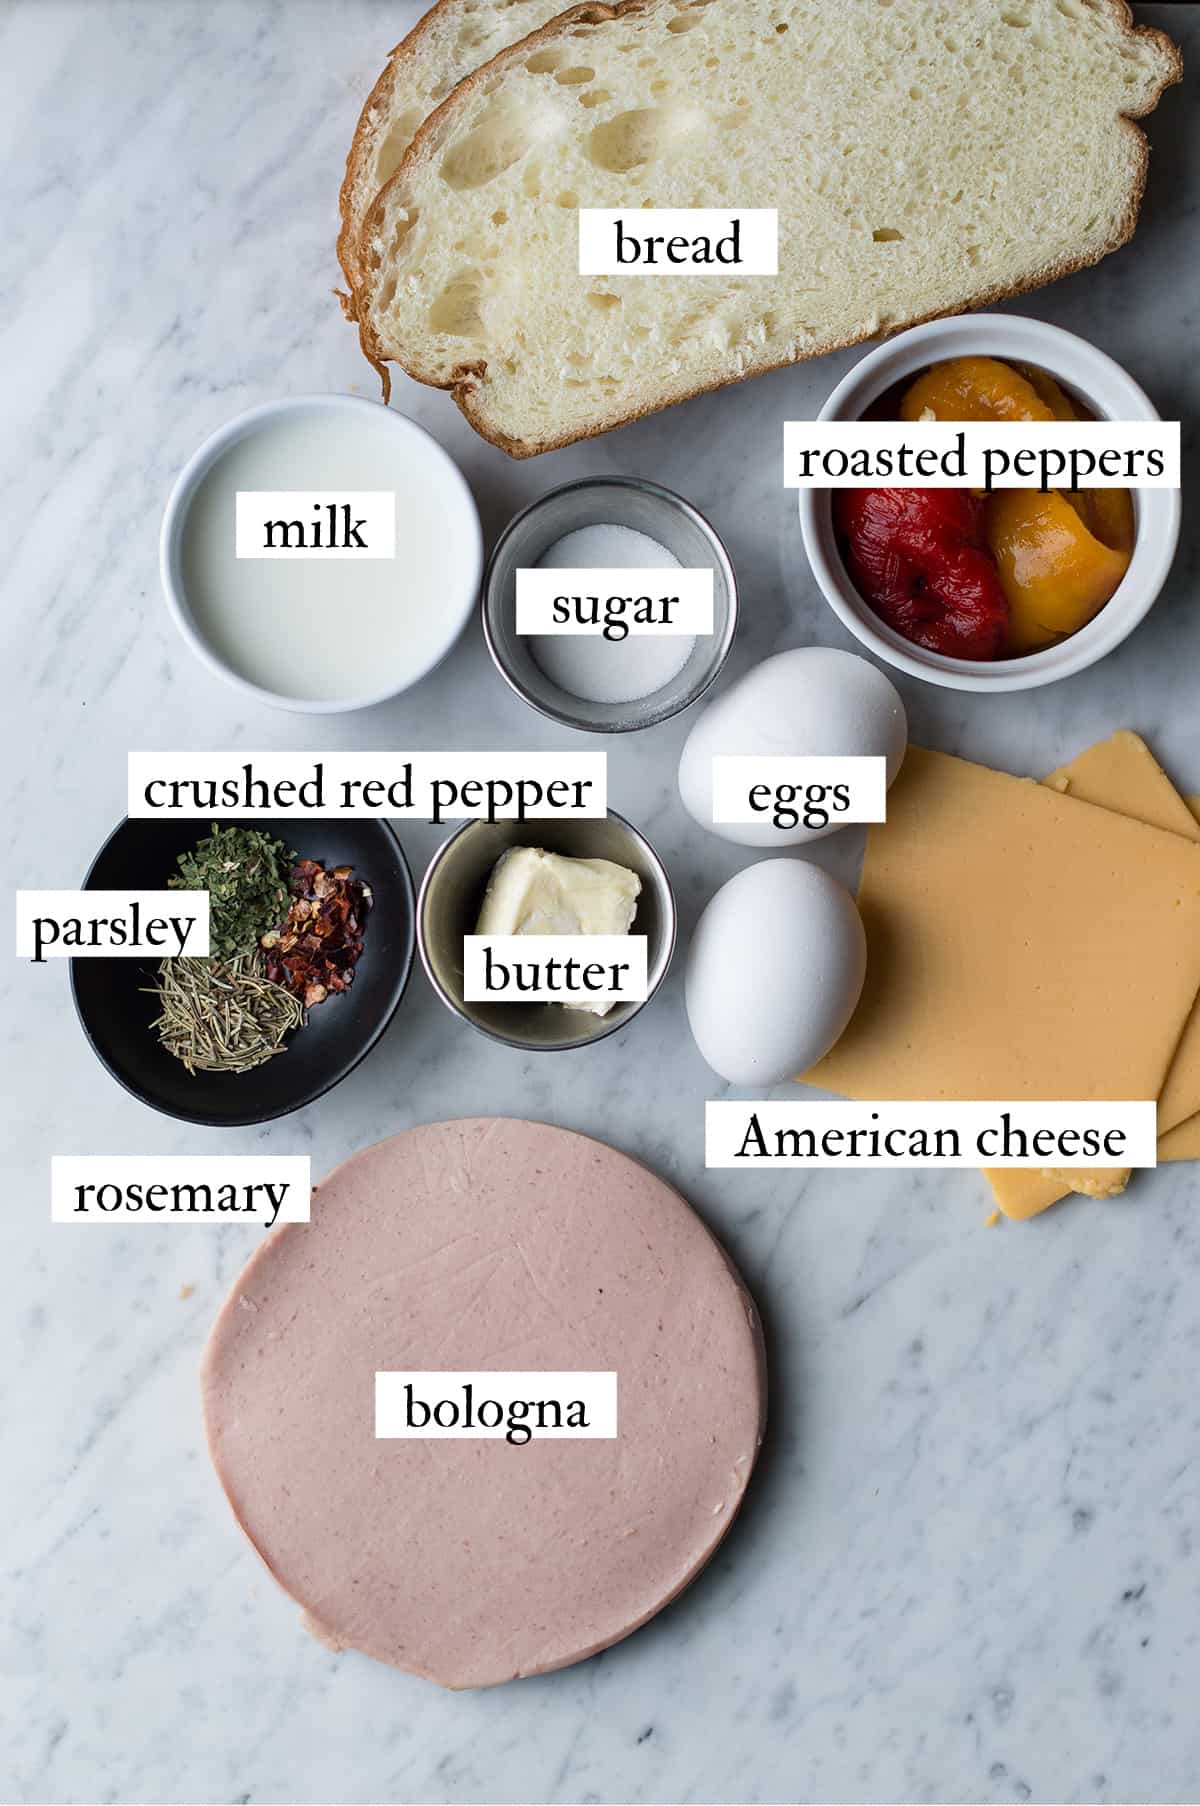 ingredients for fried bologna sandwich